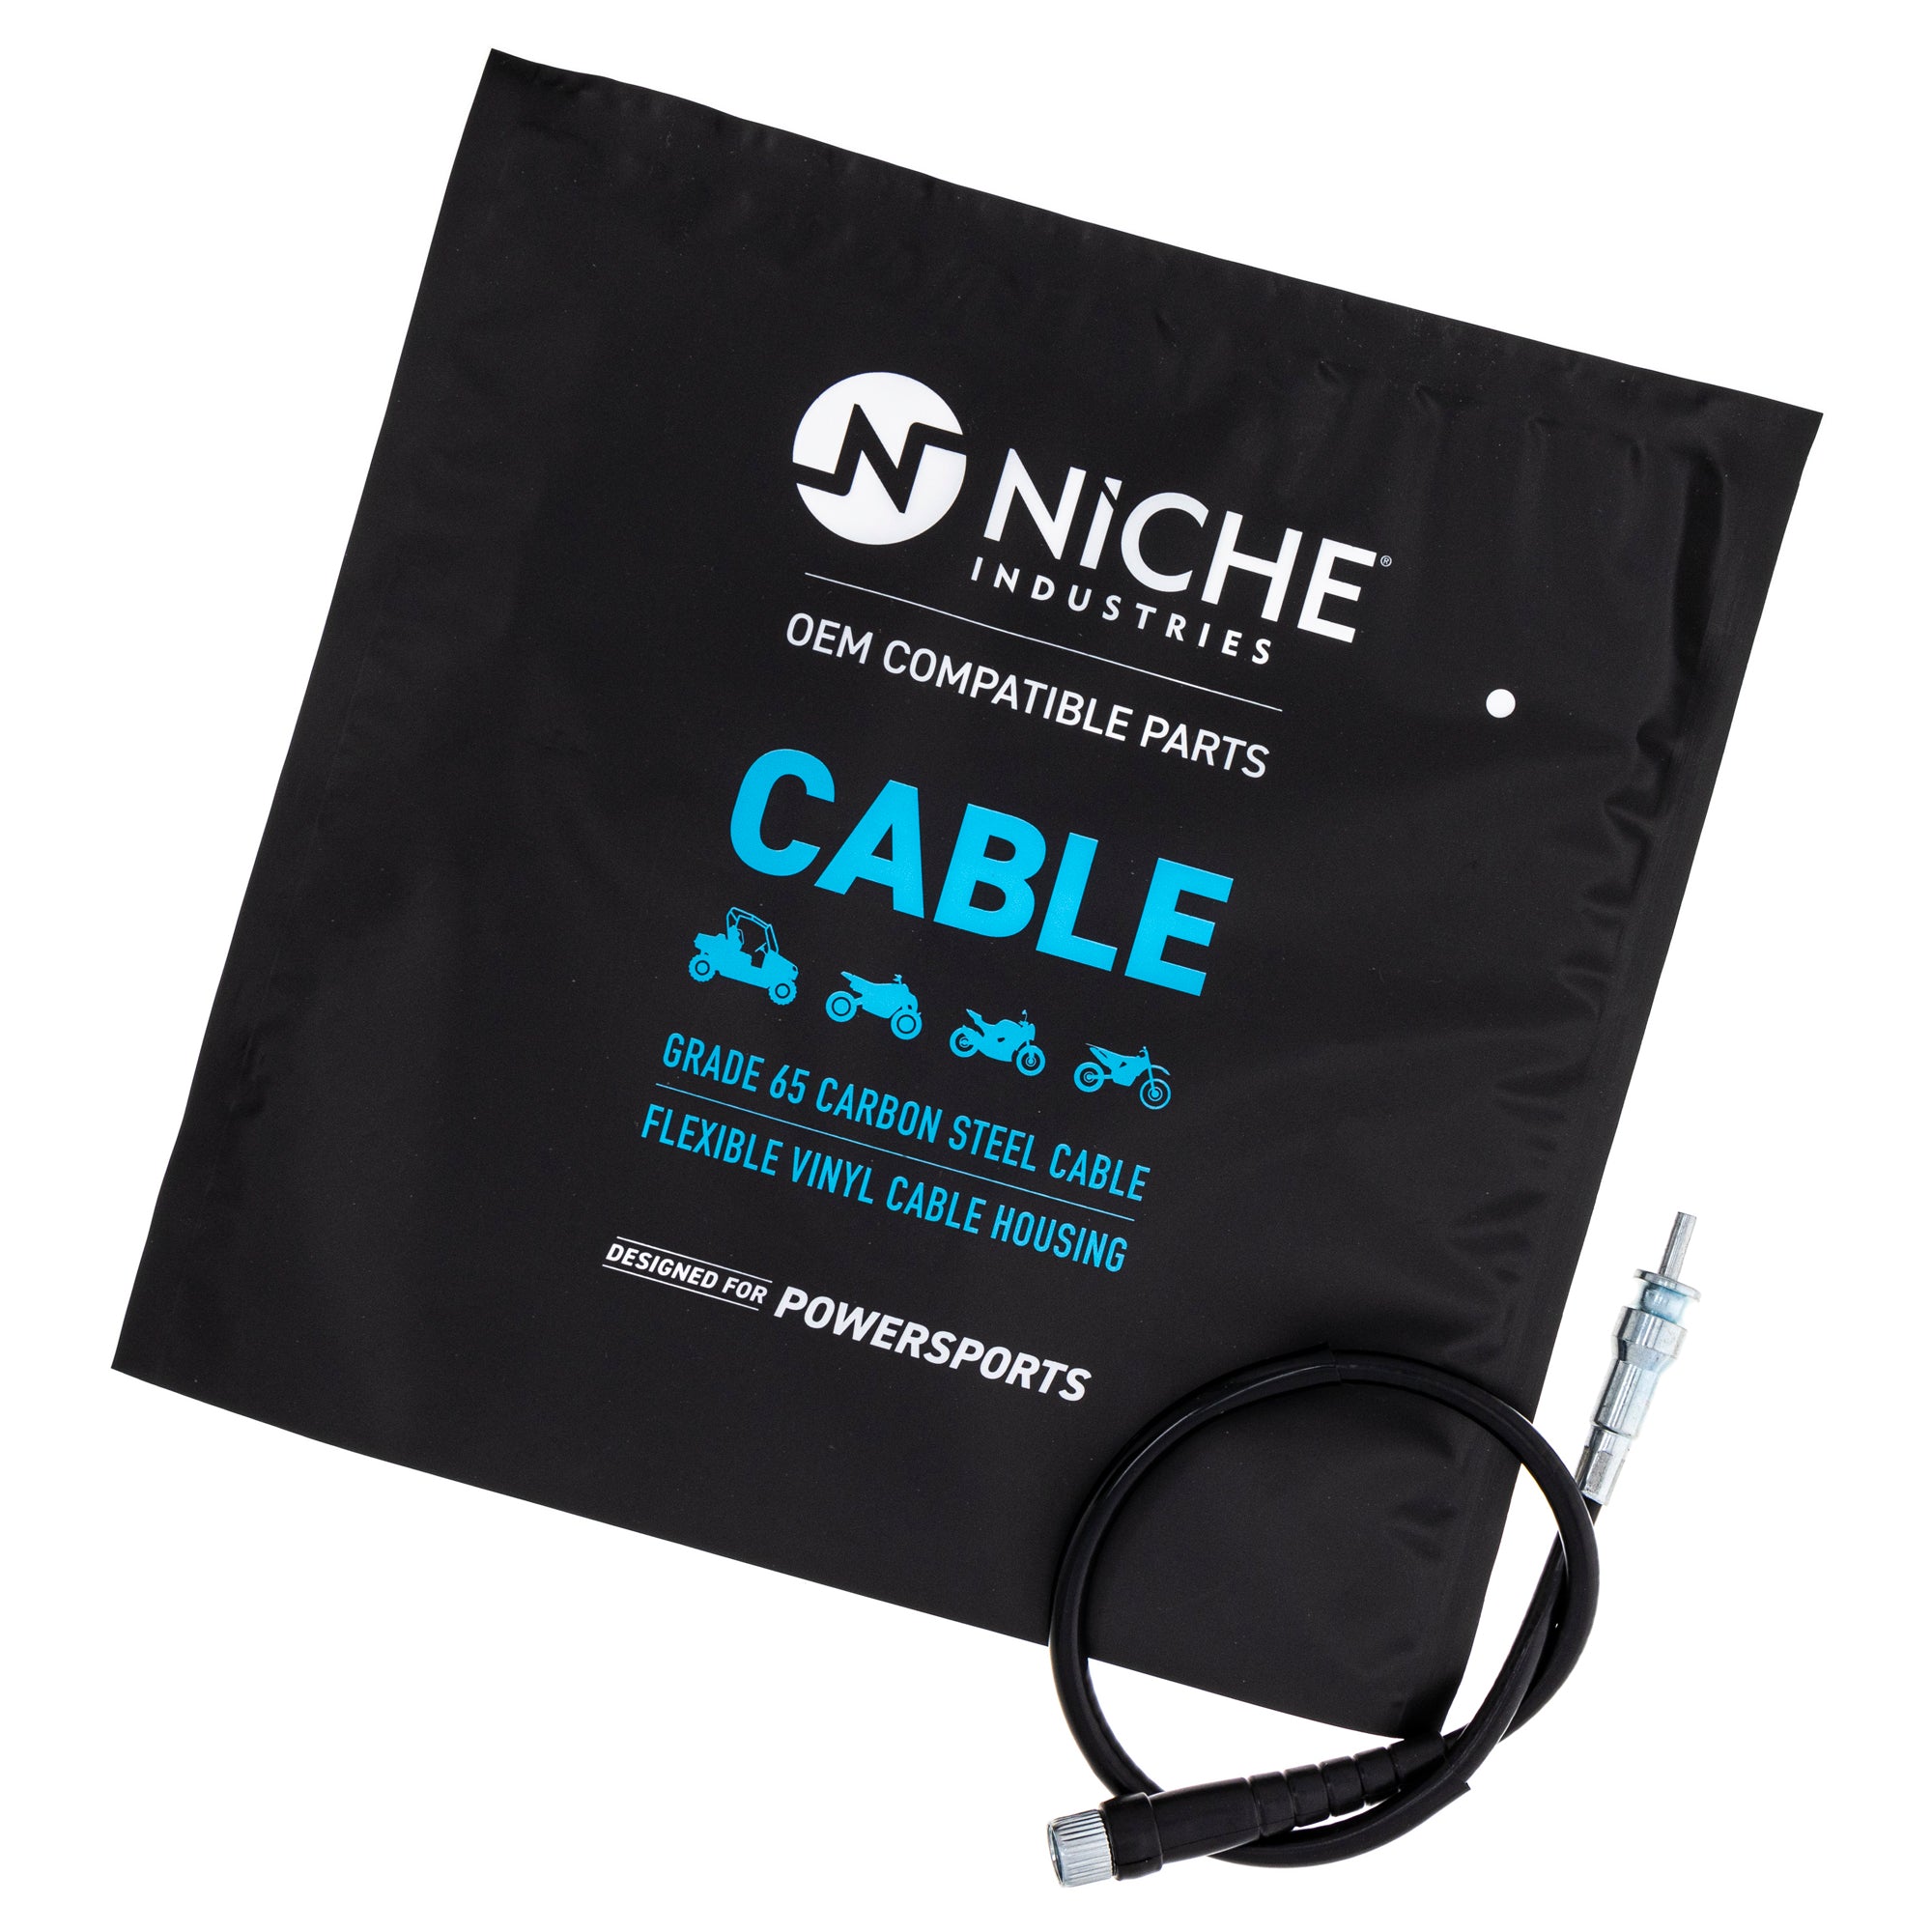 NICHE 519-CCB2181L Tachometer Cable for zOTHER Shadow